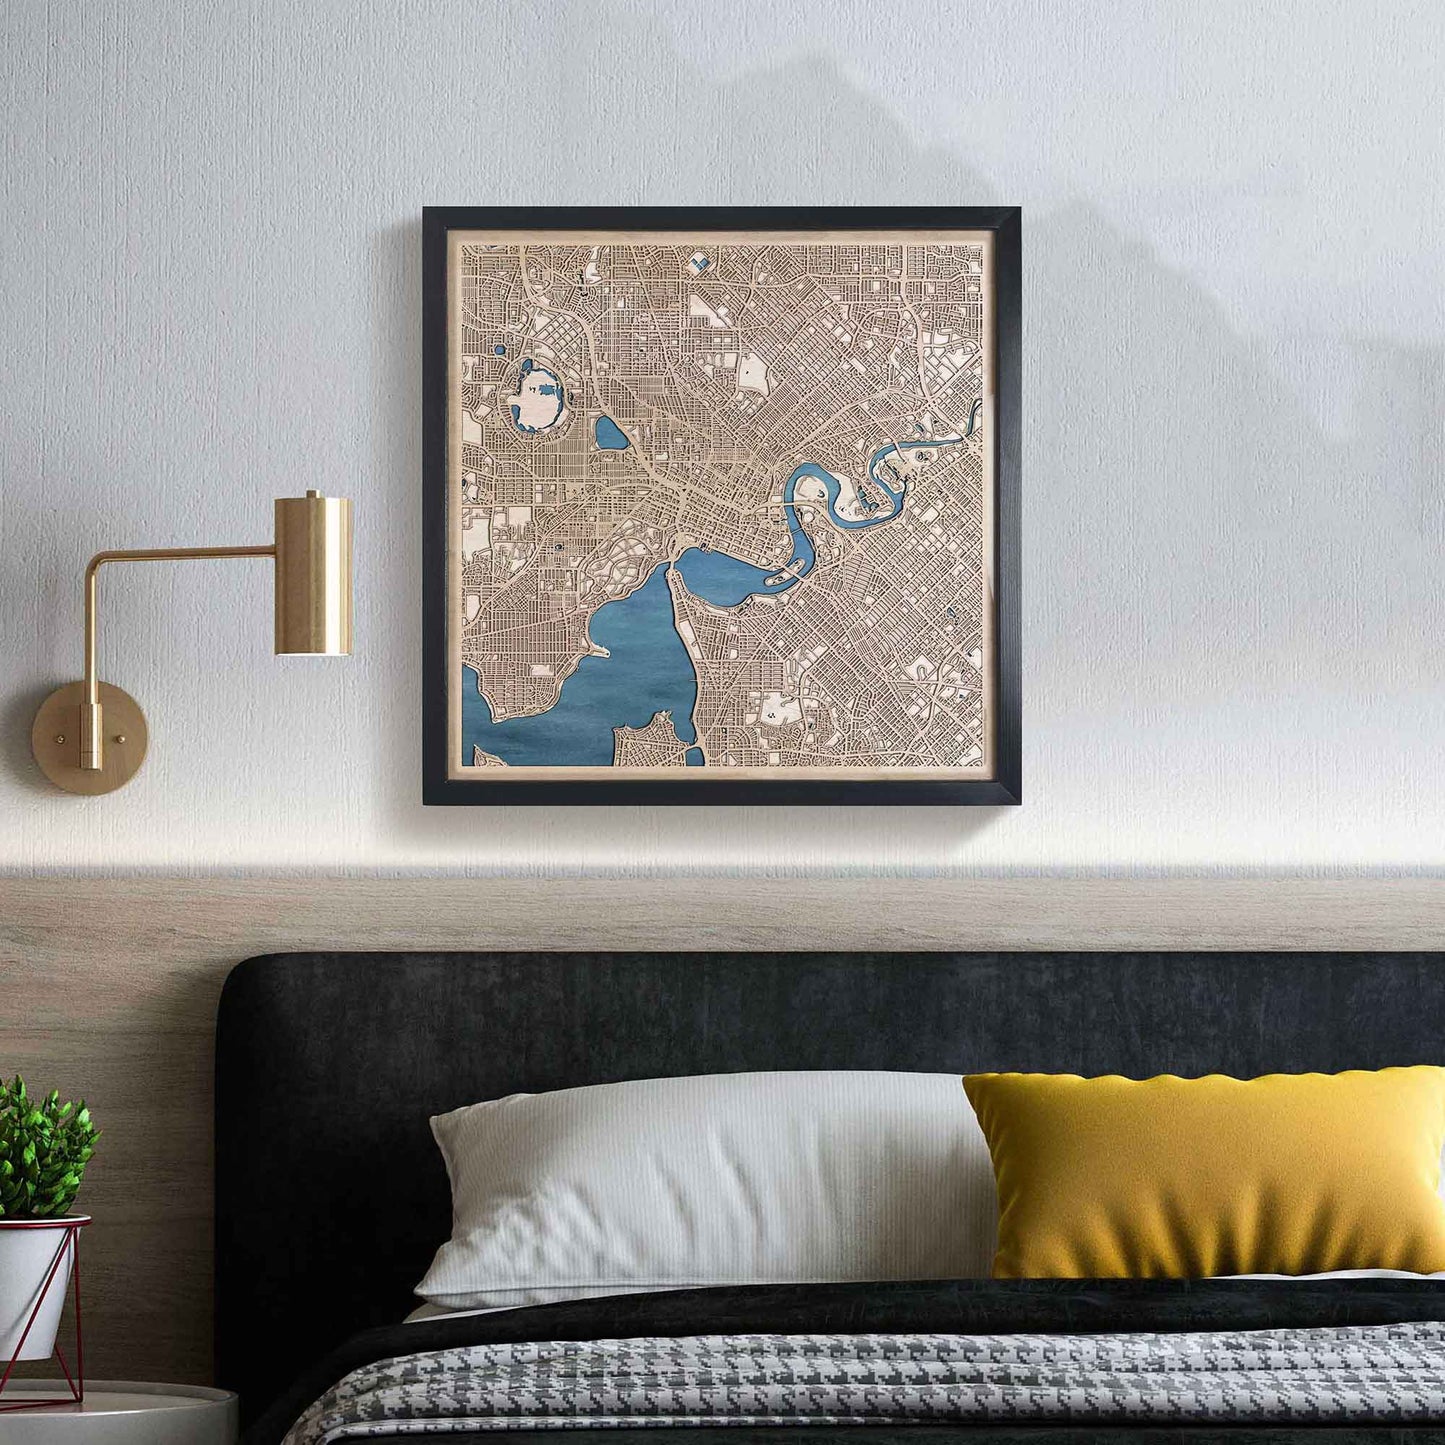 Perth Wooden Map by CityWood - Custom Wood Map Art - Unique Laser Cut Engraved - Anniversary Gift